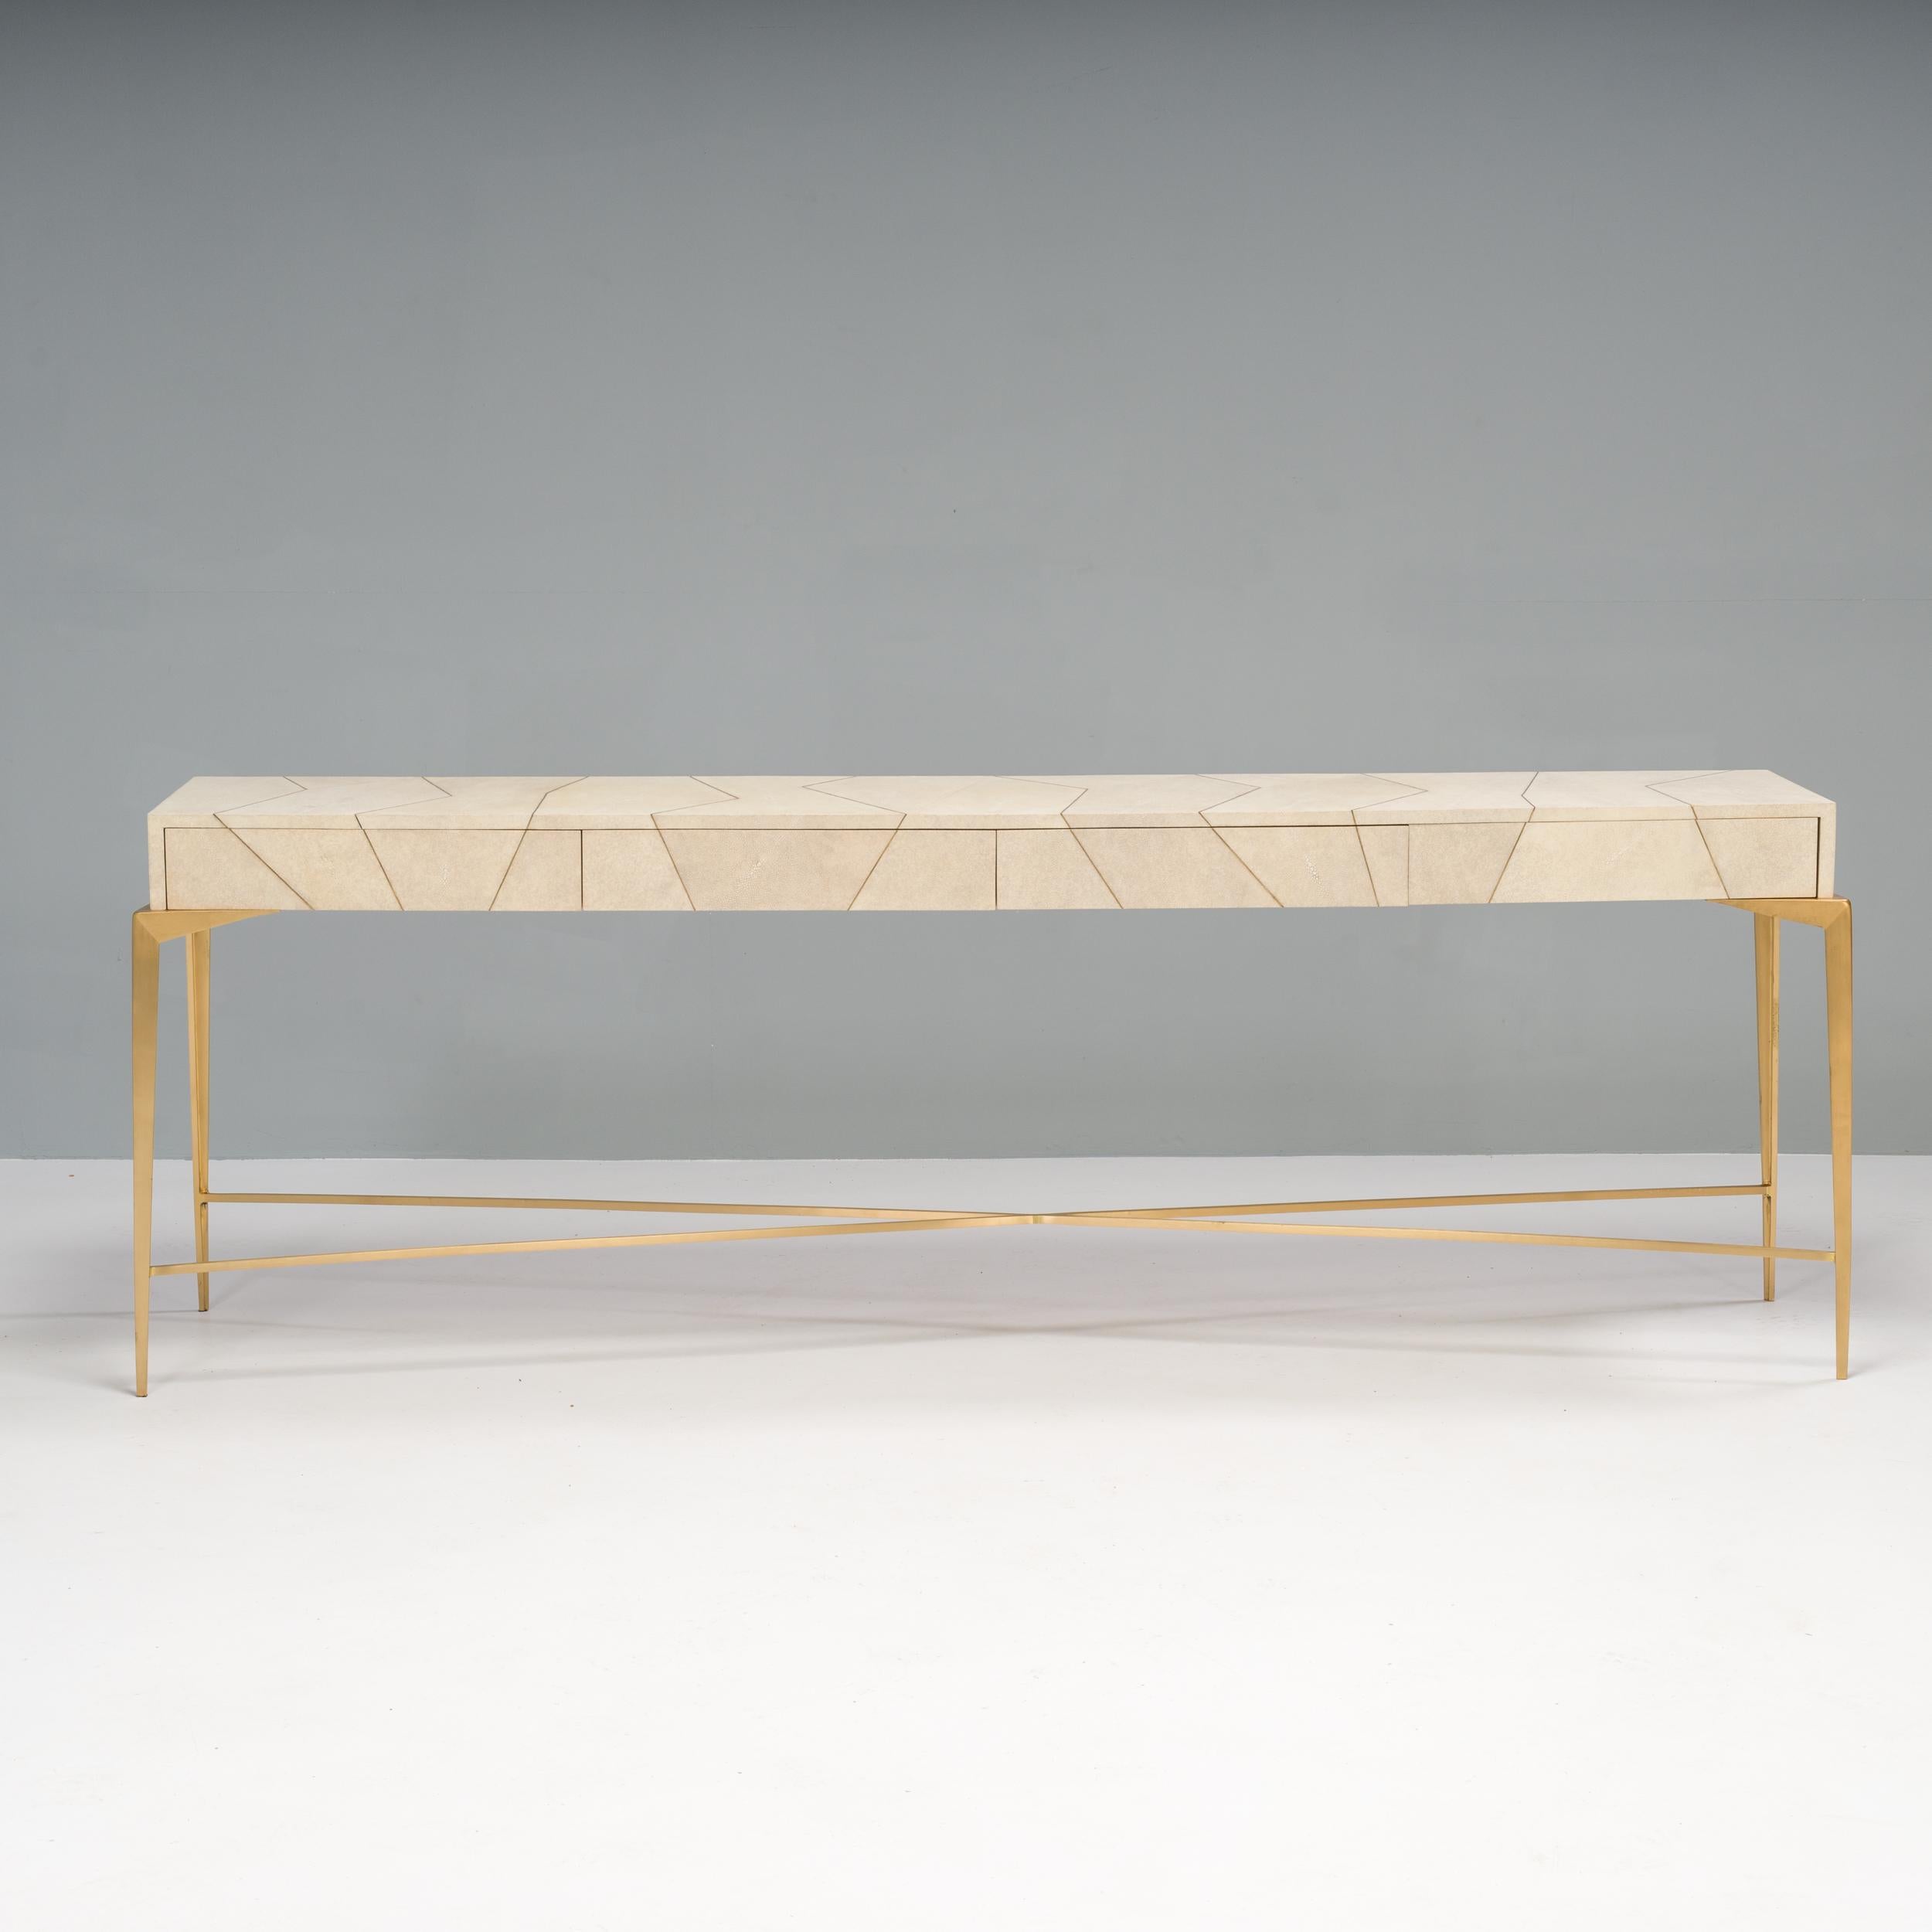 Handmade in France, Ginger Brown furniture is crafted from rare materials to create unique and luxurious designs.

The Hydra console table is covered in natural shagreen with a linear brass patchwork pattern to create a geometric effect. 

The table